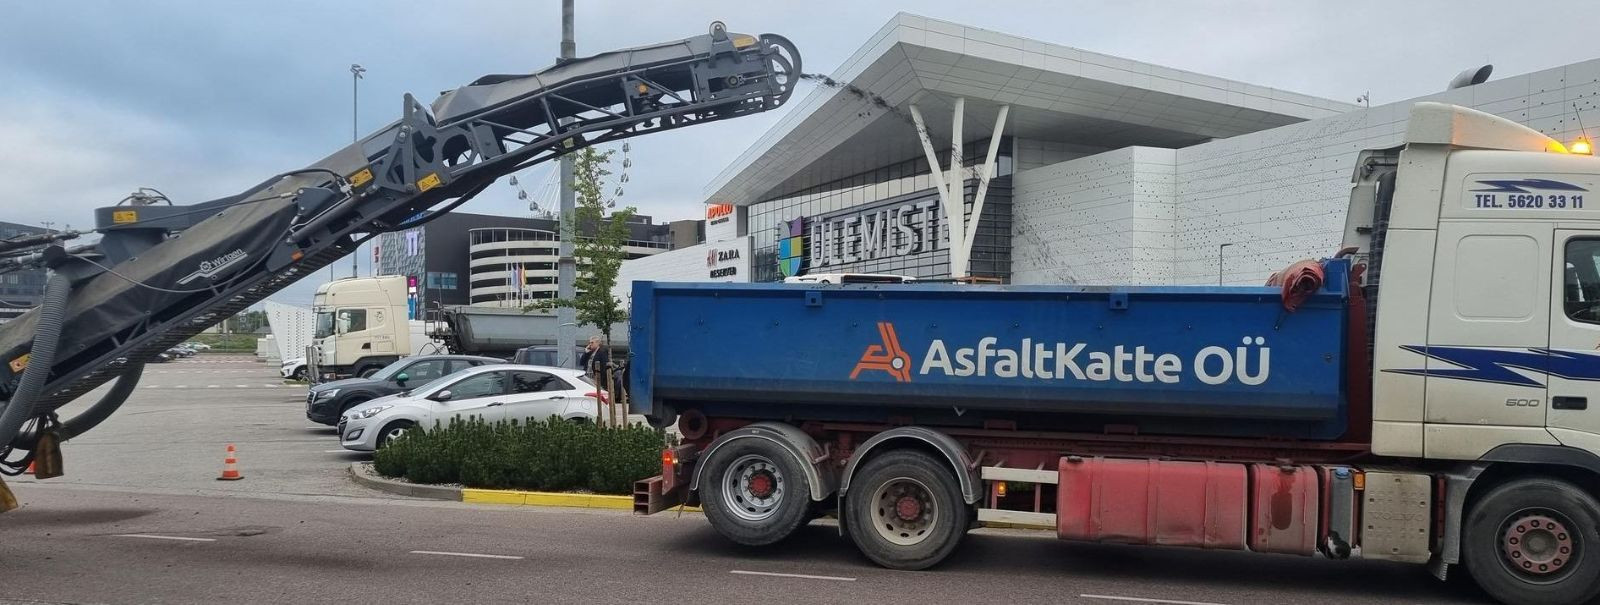 Welcome to ASFALTKATTE OÜ, where our mission is to construct and repair roads with precision and care, ensuring every journey on our paths is smooth and reliabl